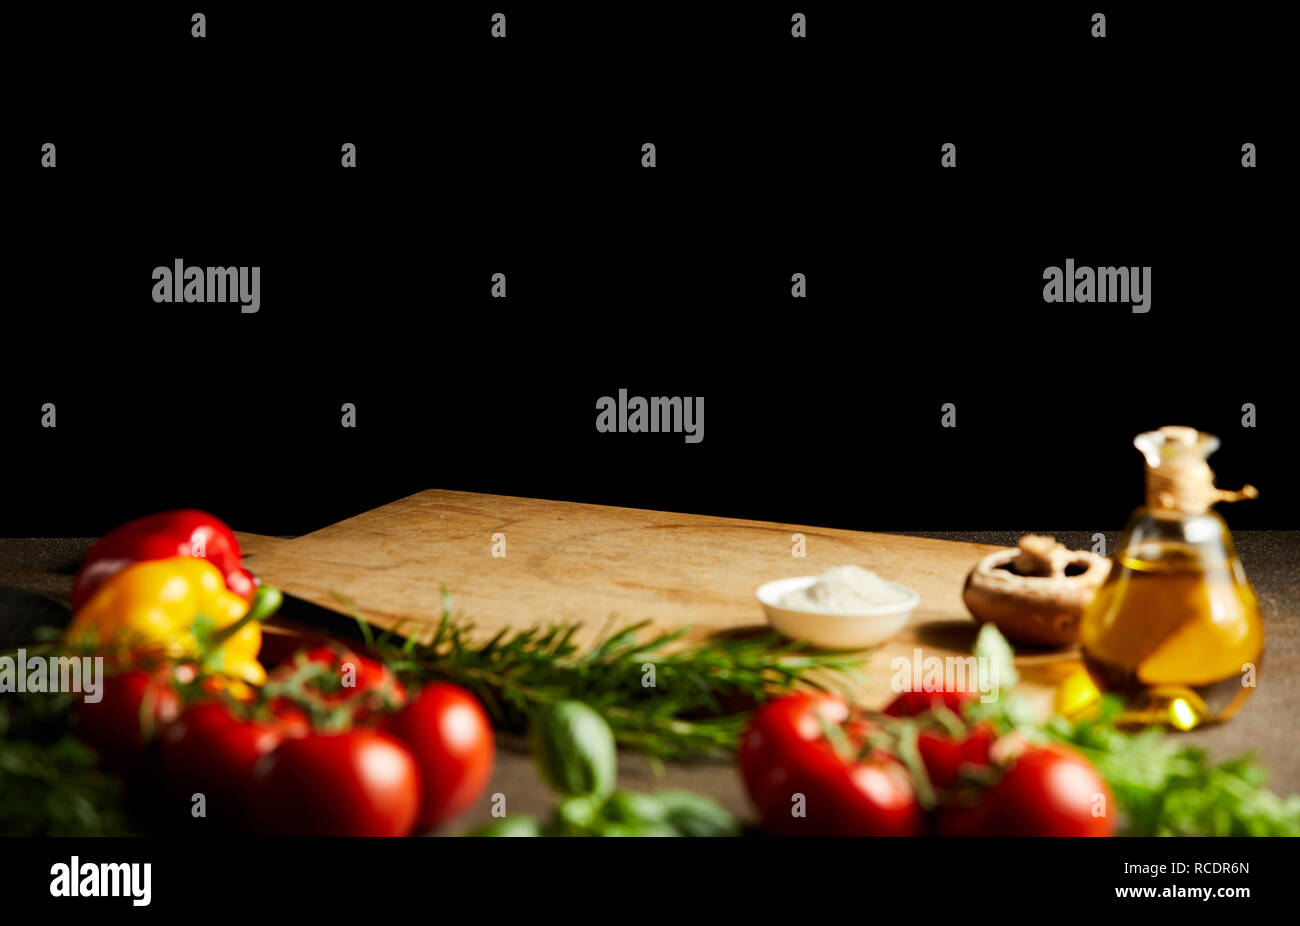 Fresh cooking ingredients around a wooden board with vegetables, herbs condiments and olive oil against a black background with copy space Stock Photo